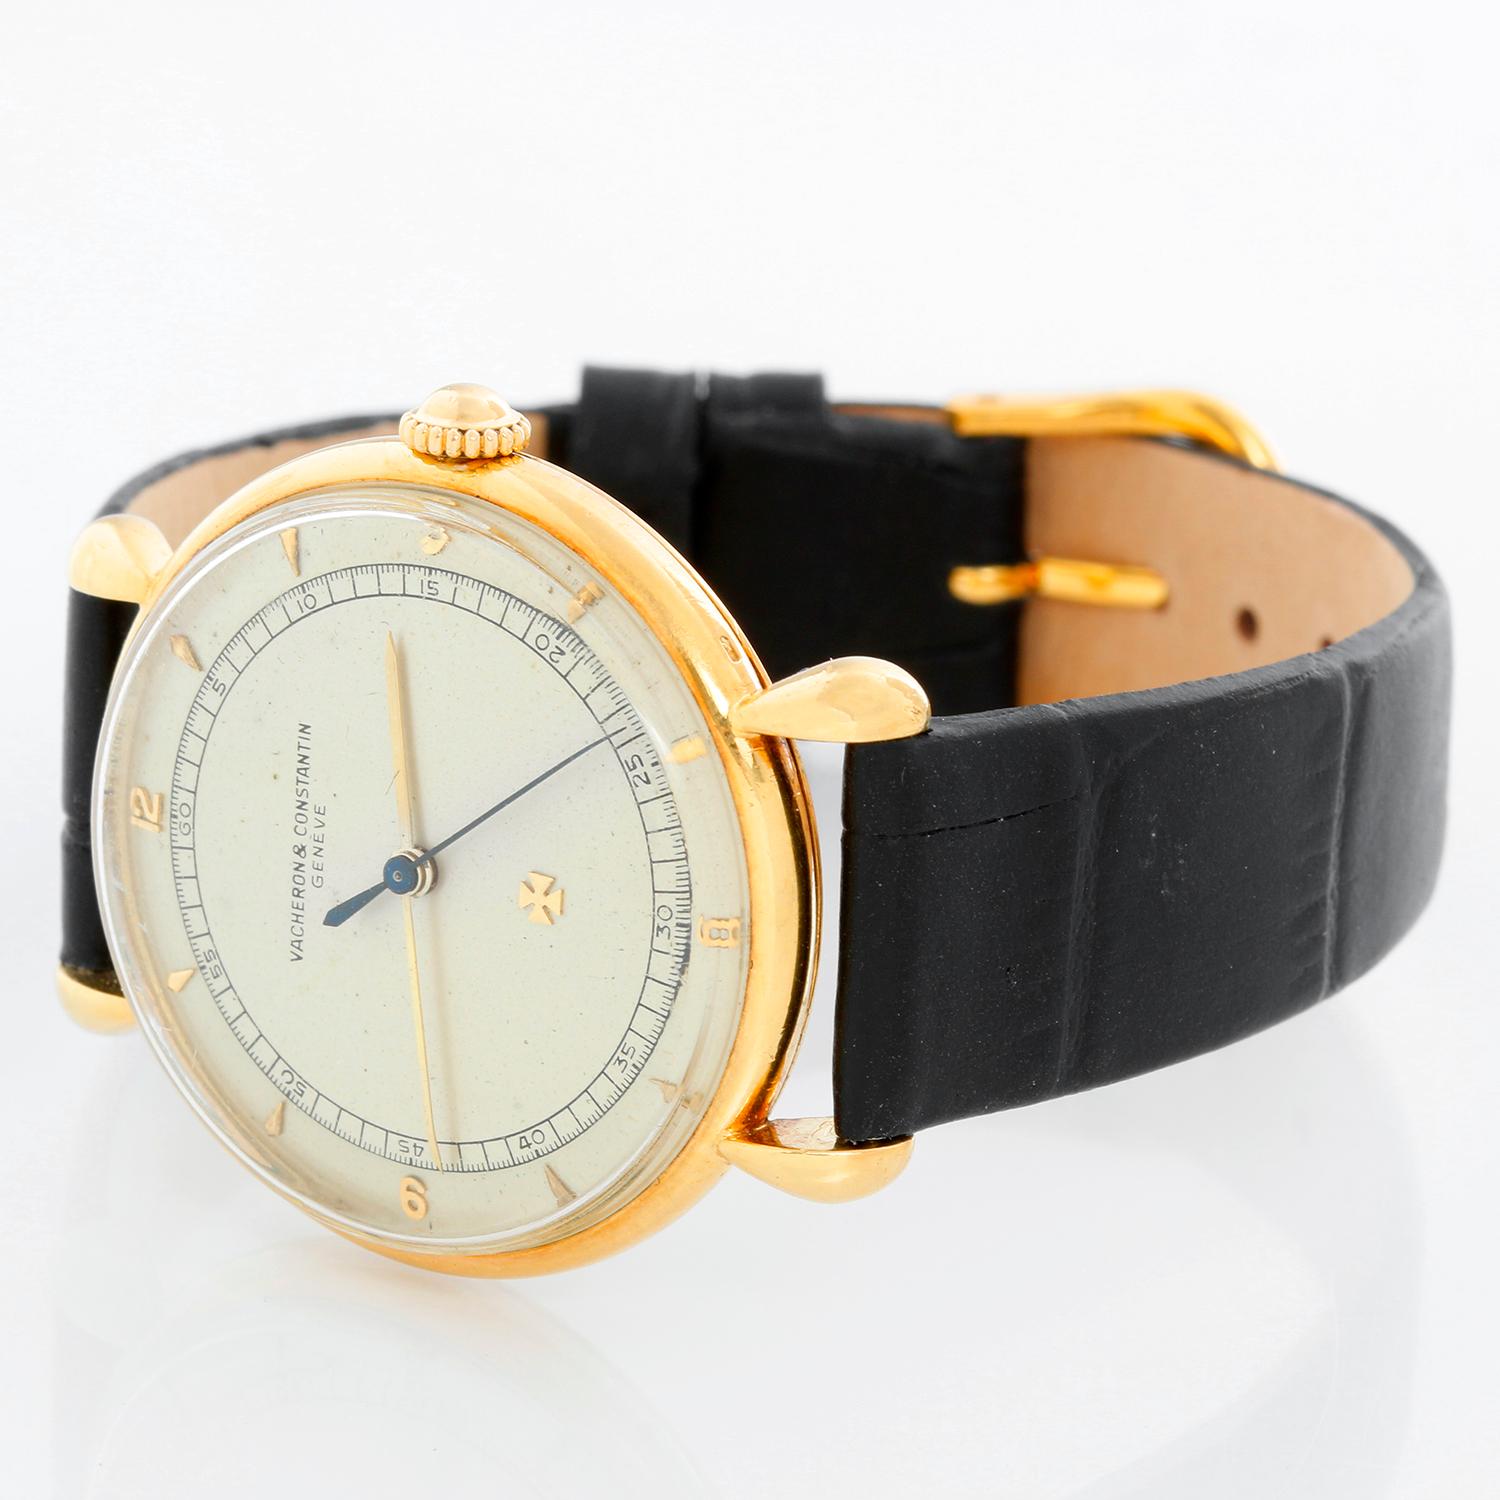 Vintage Vacheron Constantin 18k Yellow Gold Men's Watch - Manual winding. 18k yellow gold case (36 mm diameter). Silver dial with stick markers. Black leather strap with tang buckle. Vintage, pre-owned, with custom box.